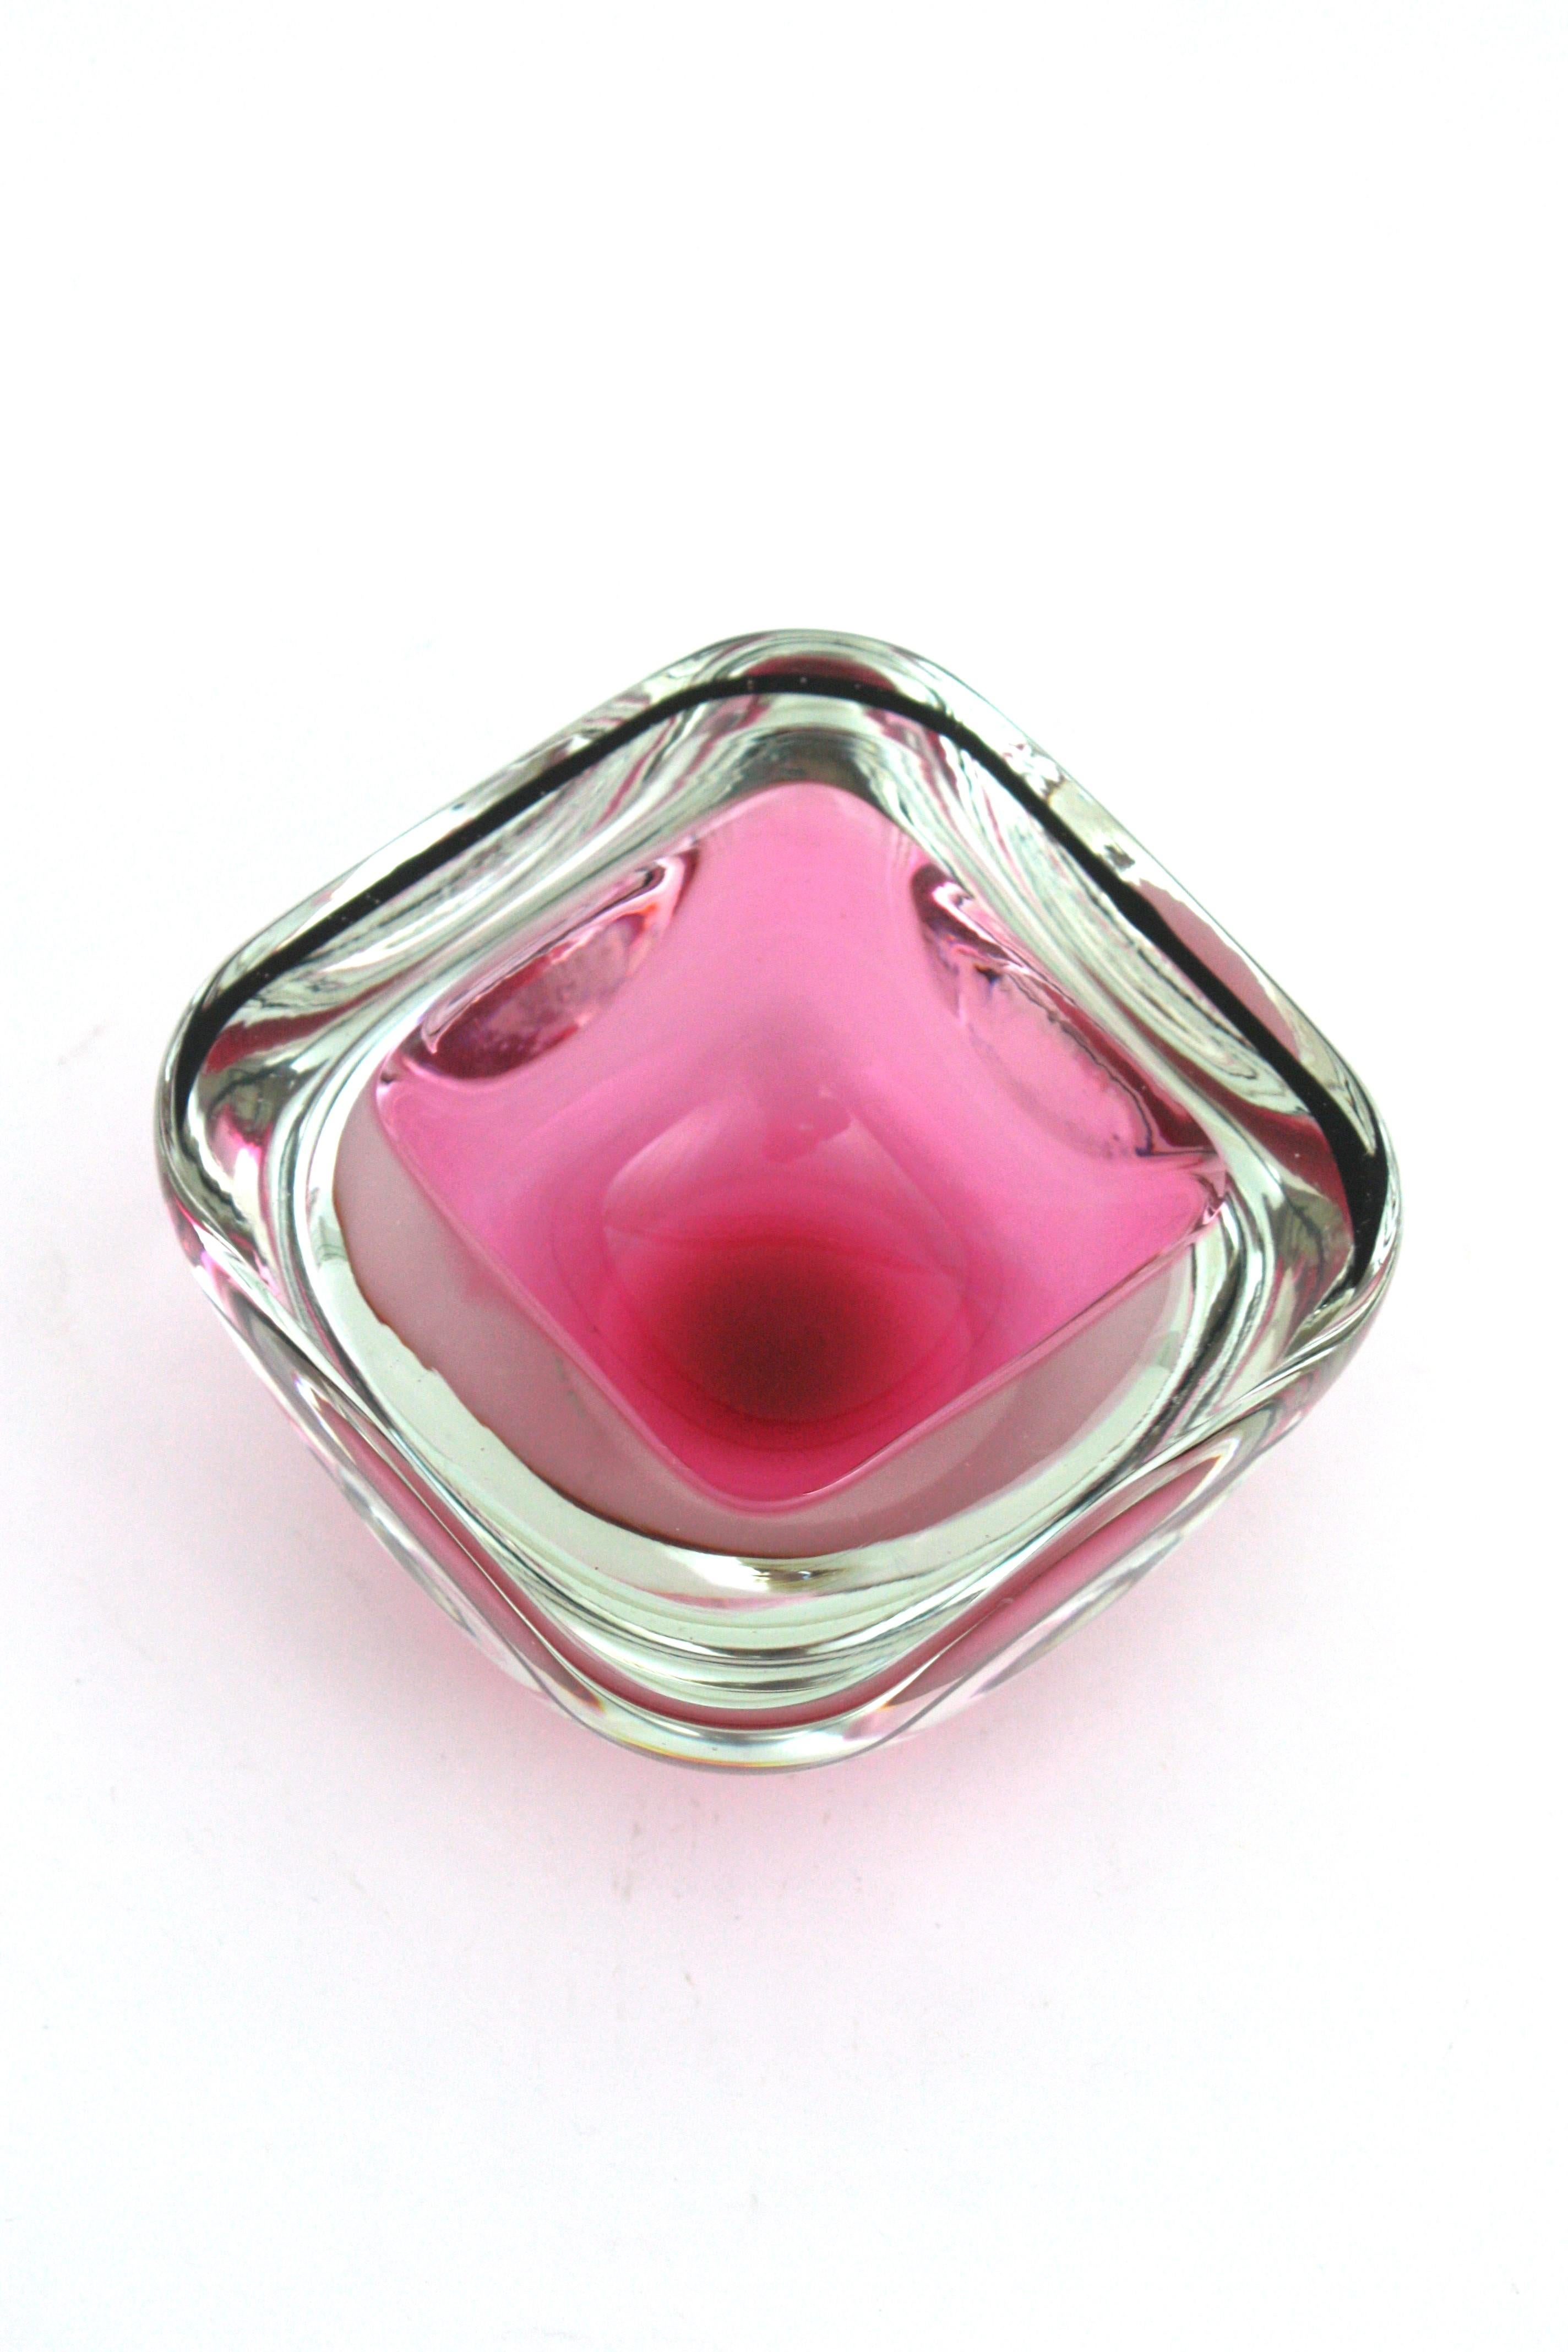 Archimede Seguso Murano Sommerso Pink Black Geode Art Glass Bowl For Sale 5